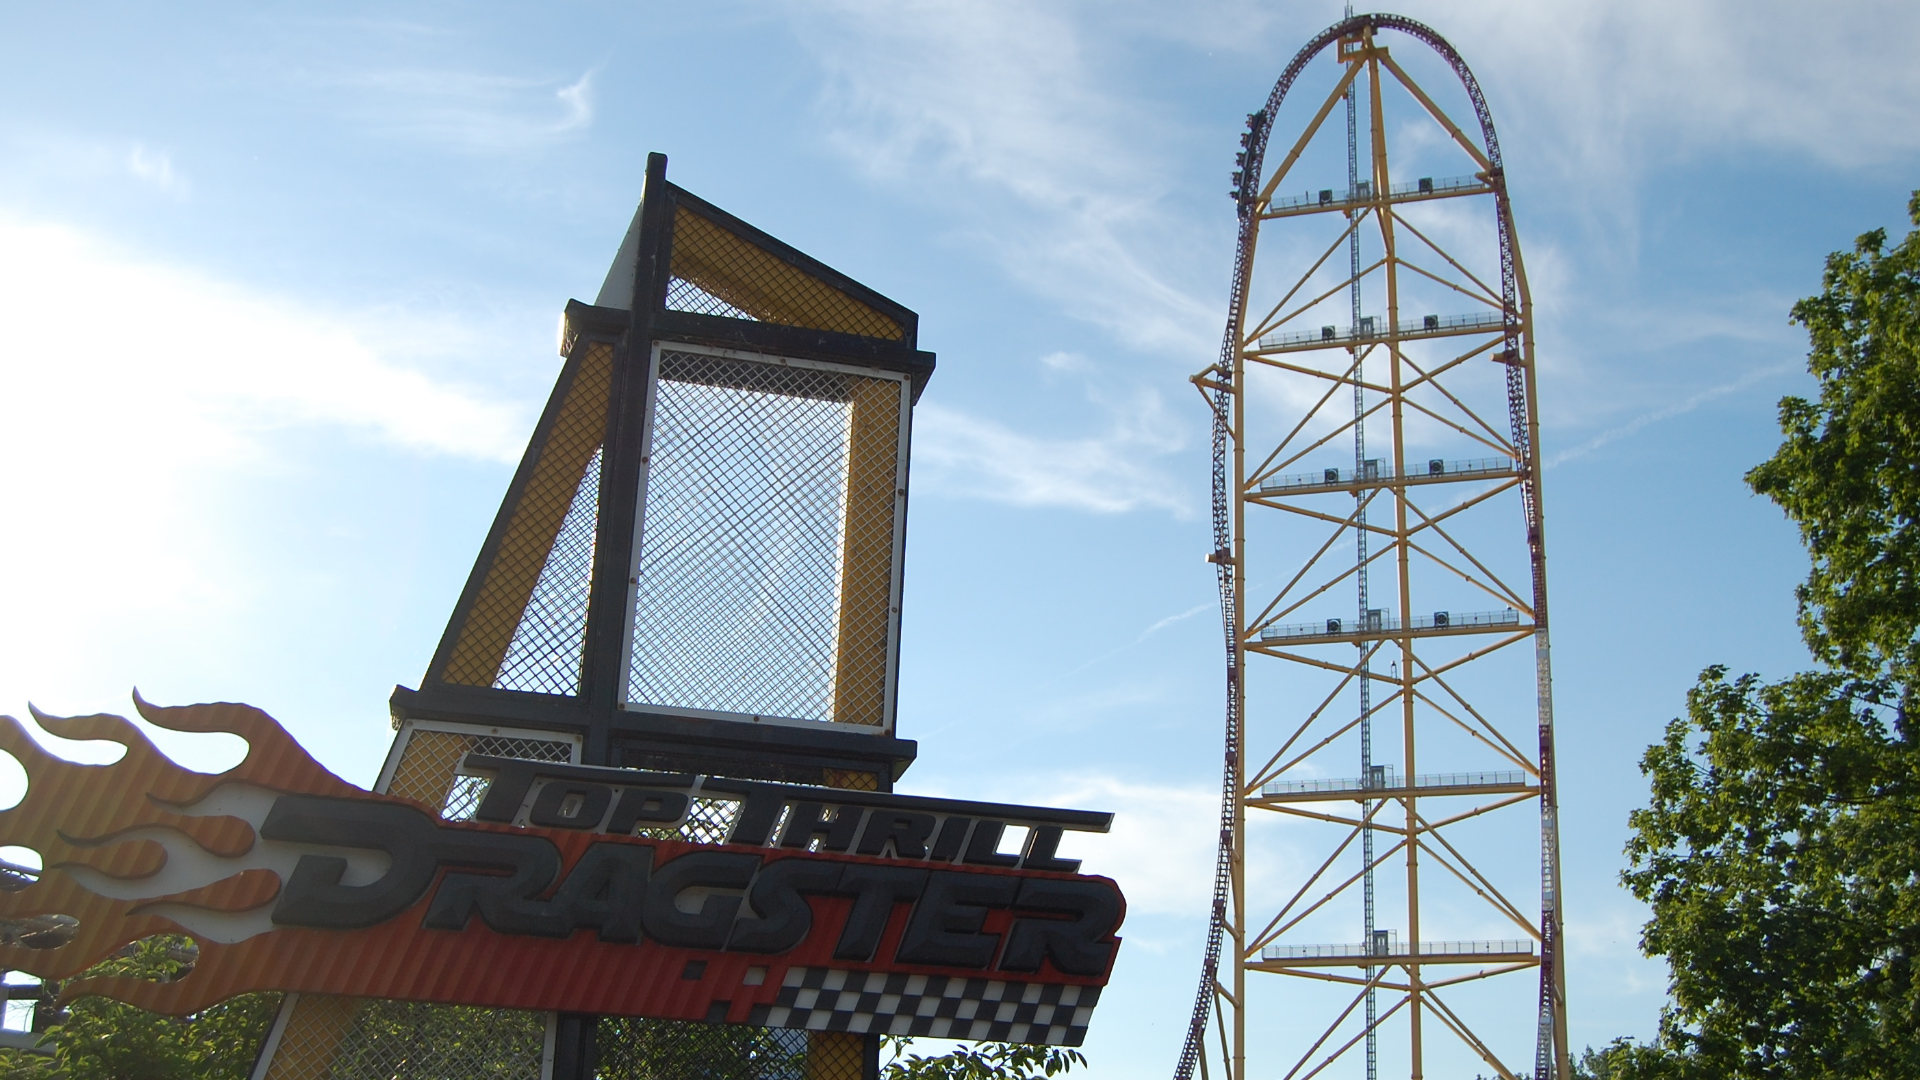 The Ohio Department of Agriculture gives an update on the status of their investigation regarding an accident at Cedar Point involving the Top Thrill Dragster ride.